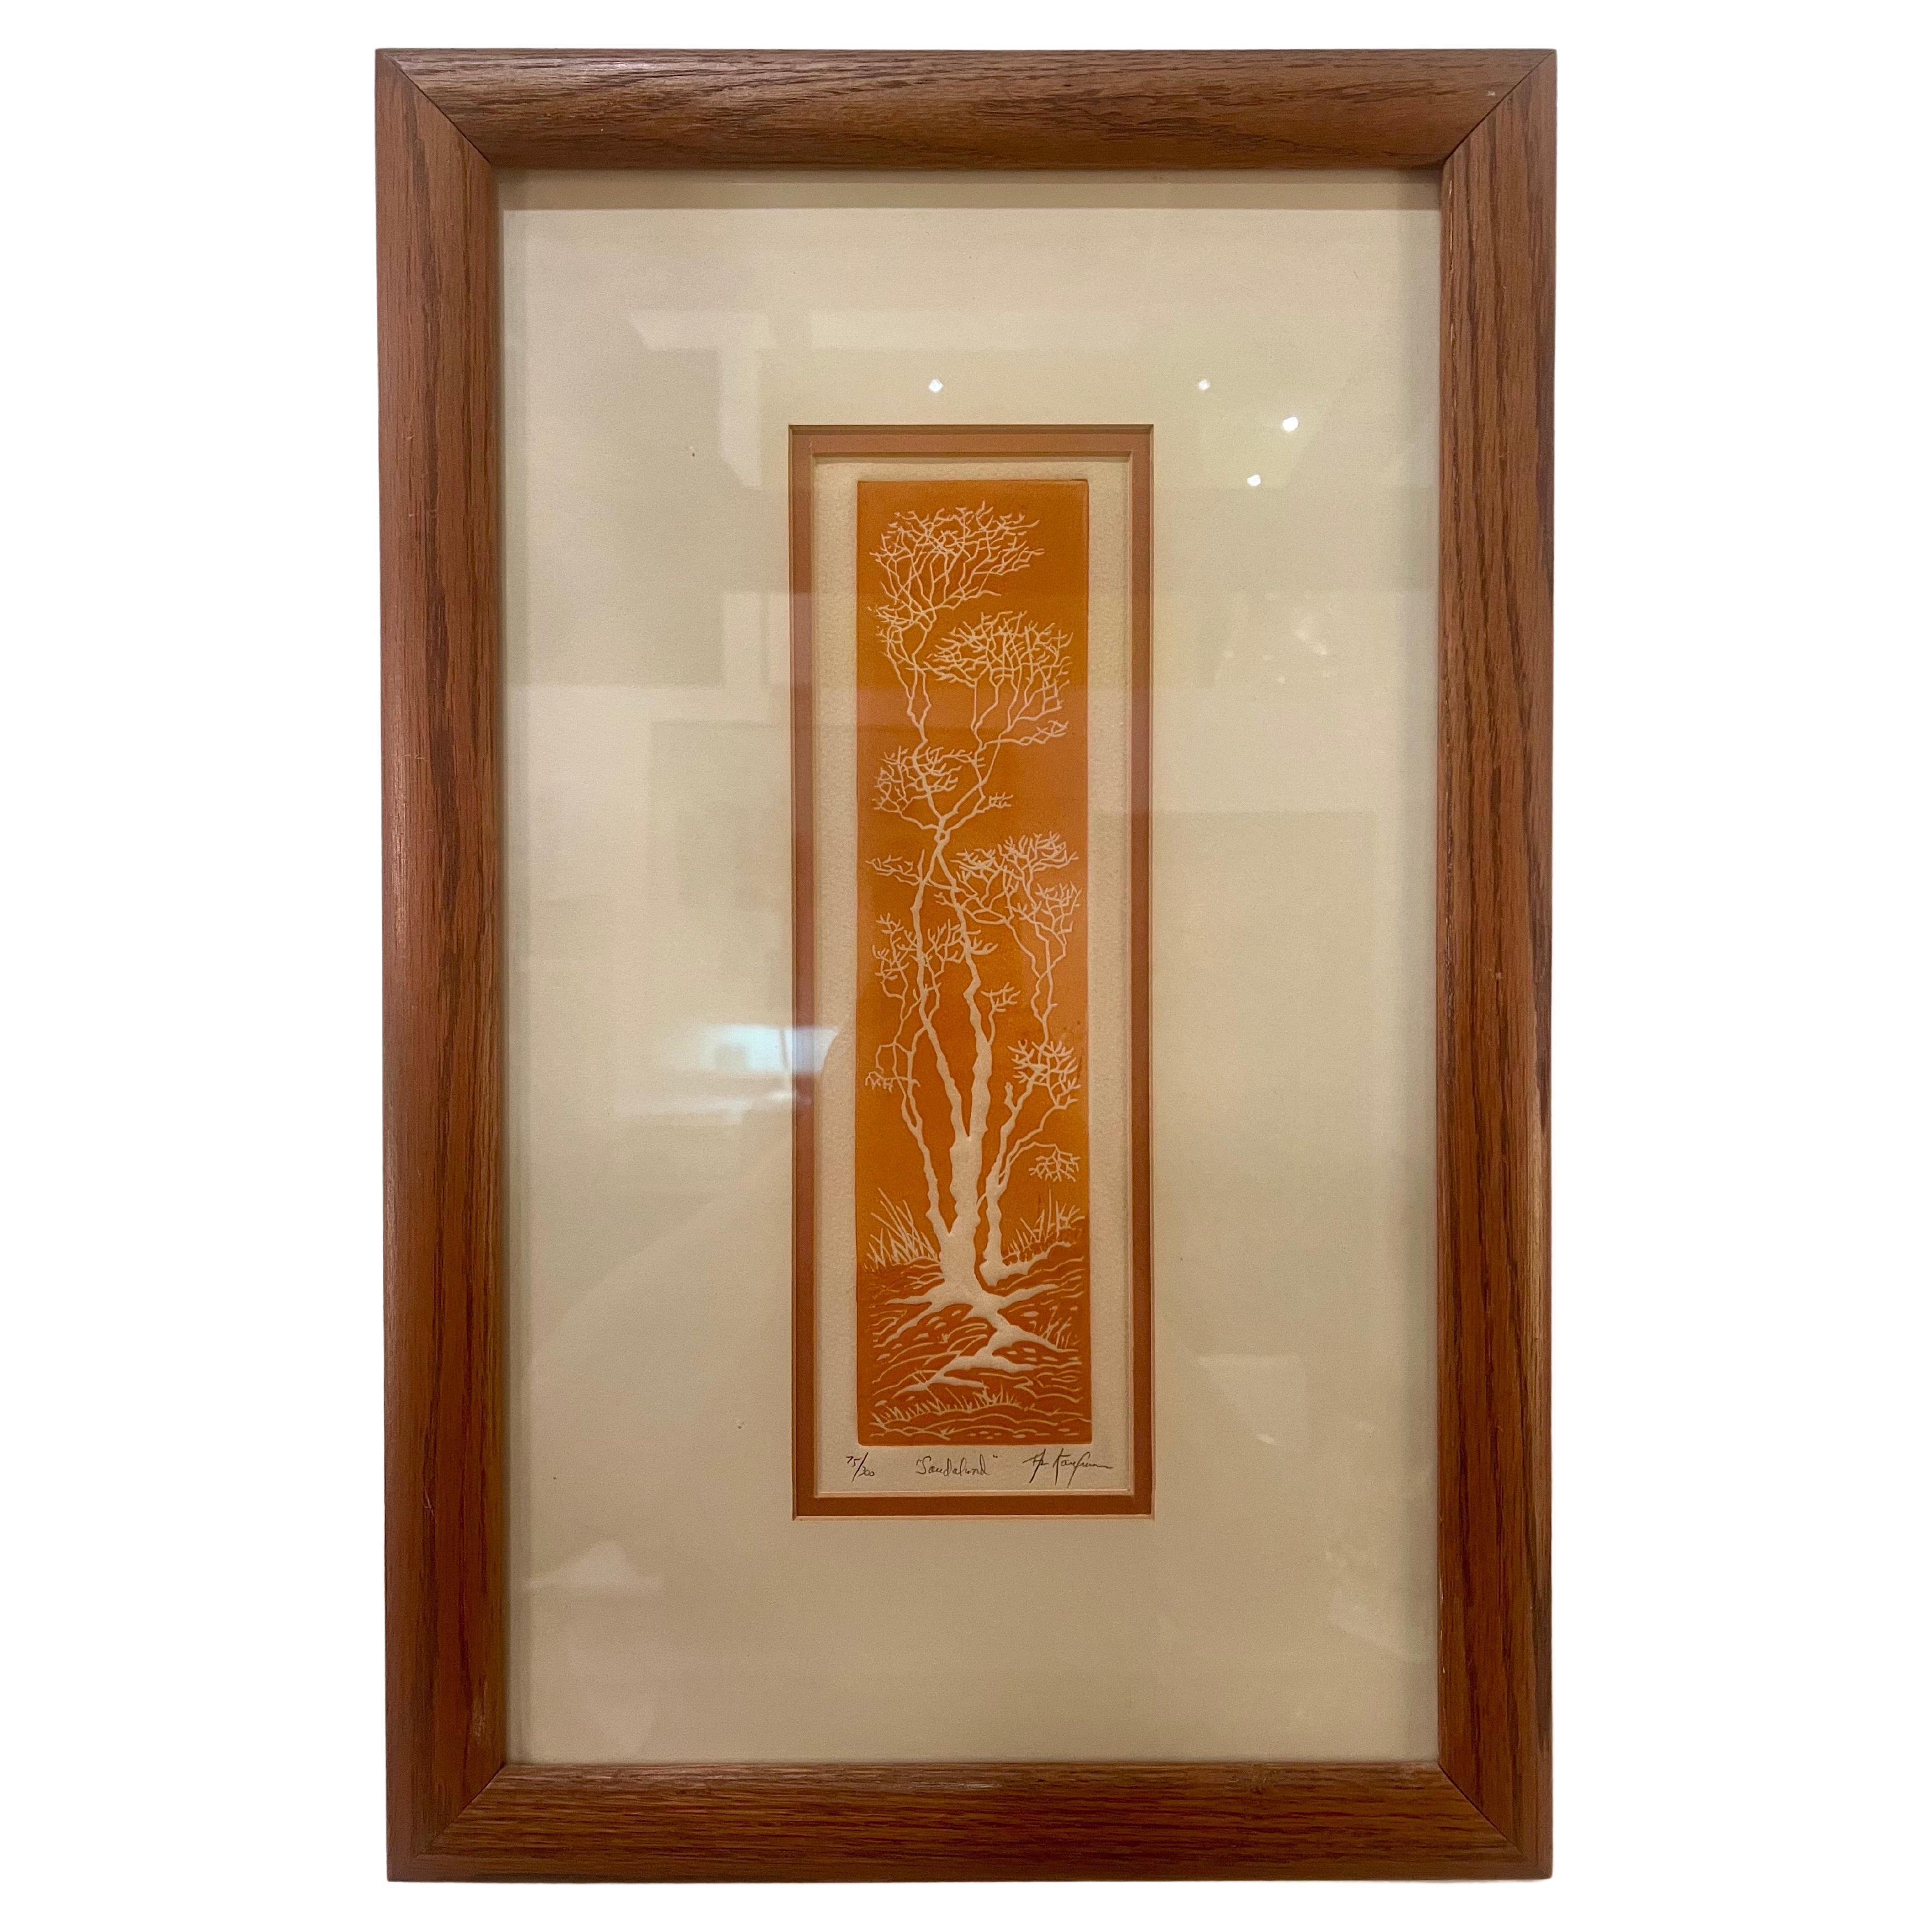 Al Kaufman Framed Original Signed & Numbered Etching with COA 75/300 For Sale